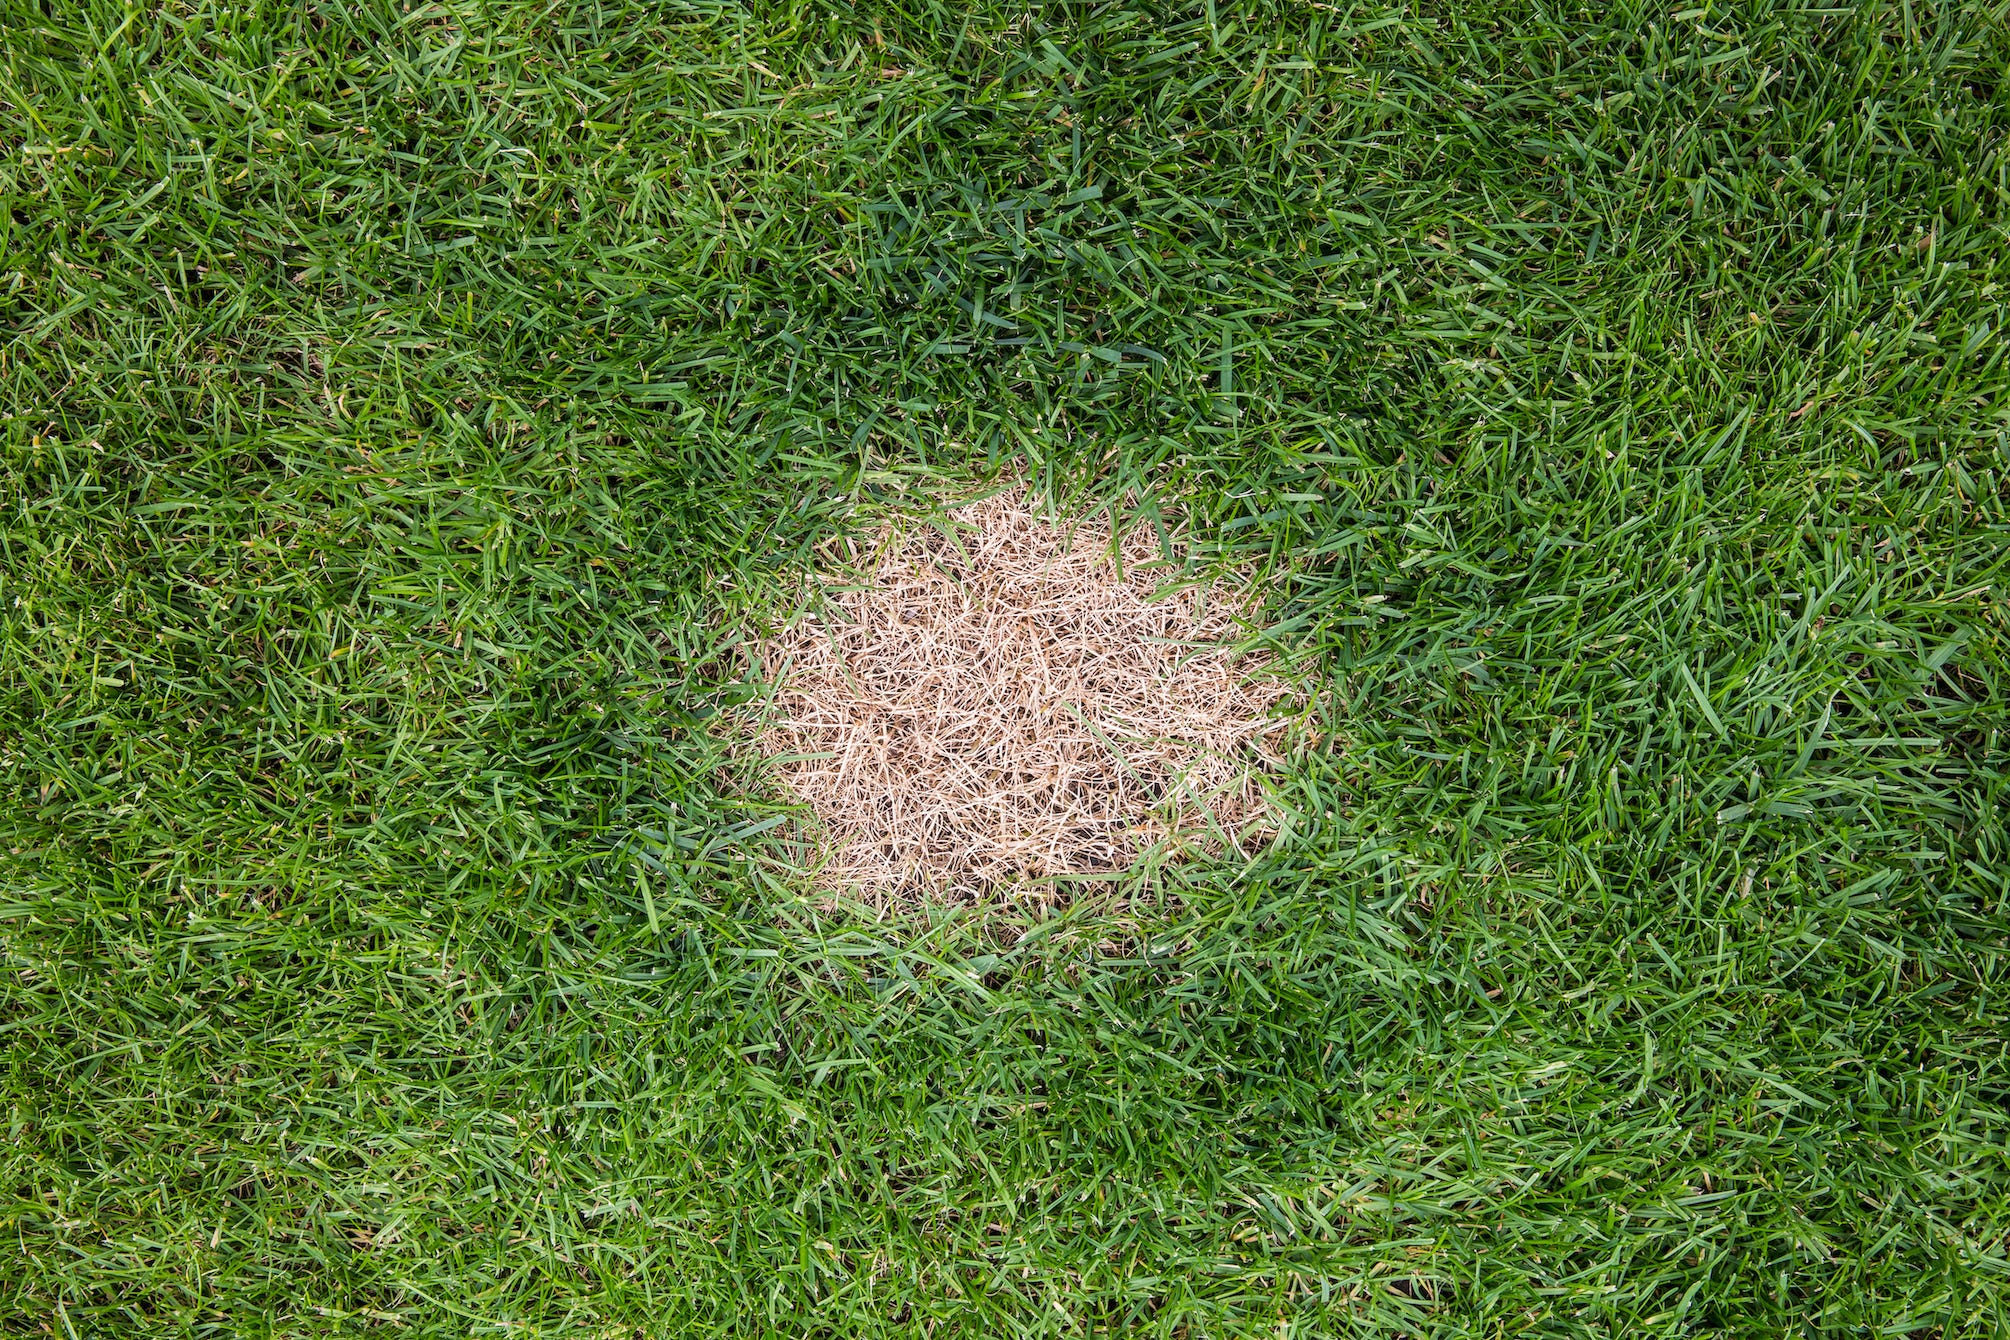 what causes dog pee to burn grass